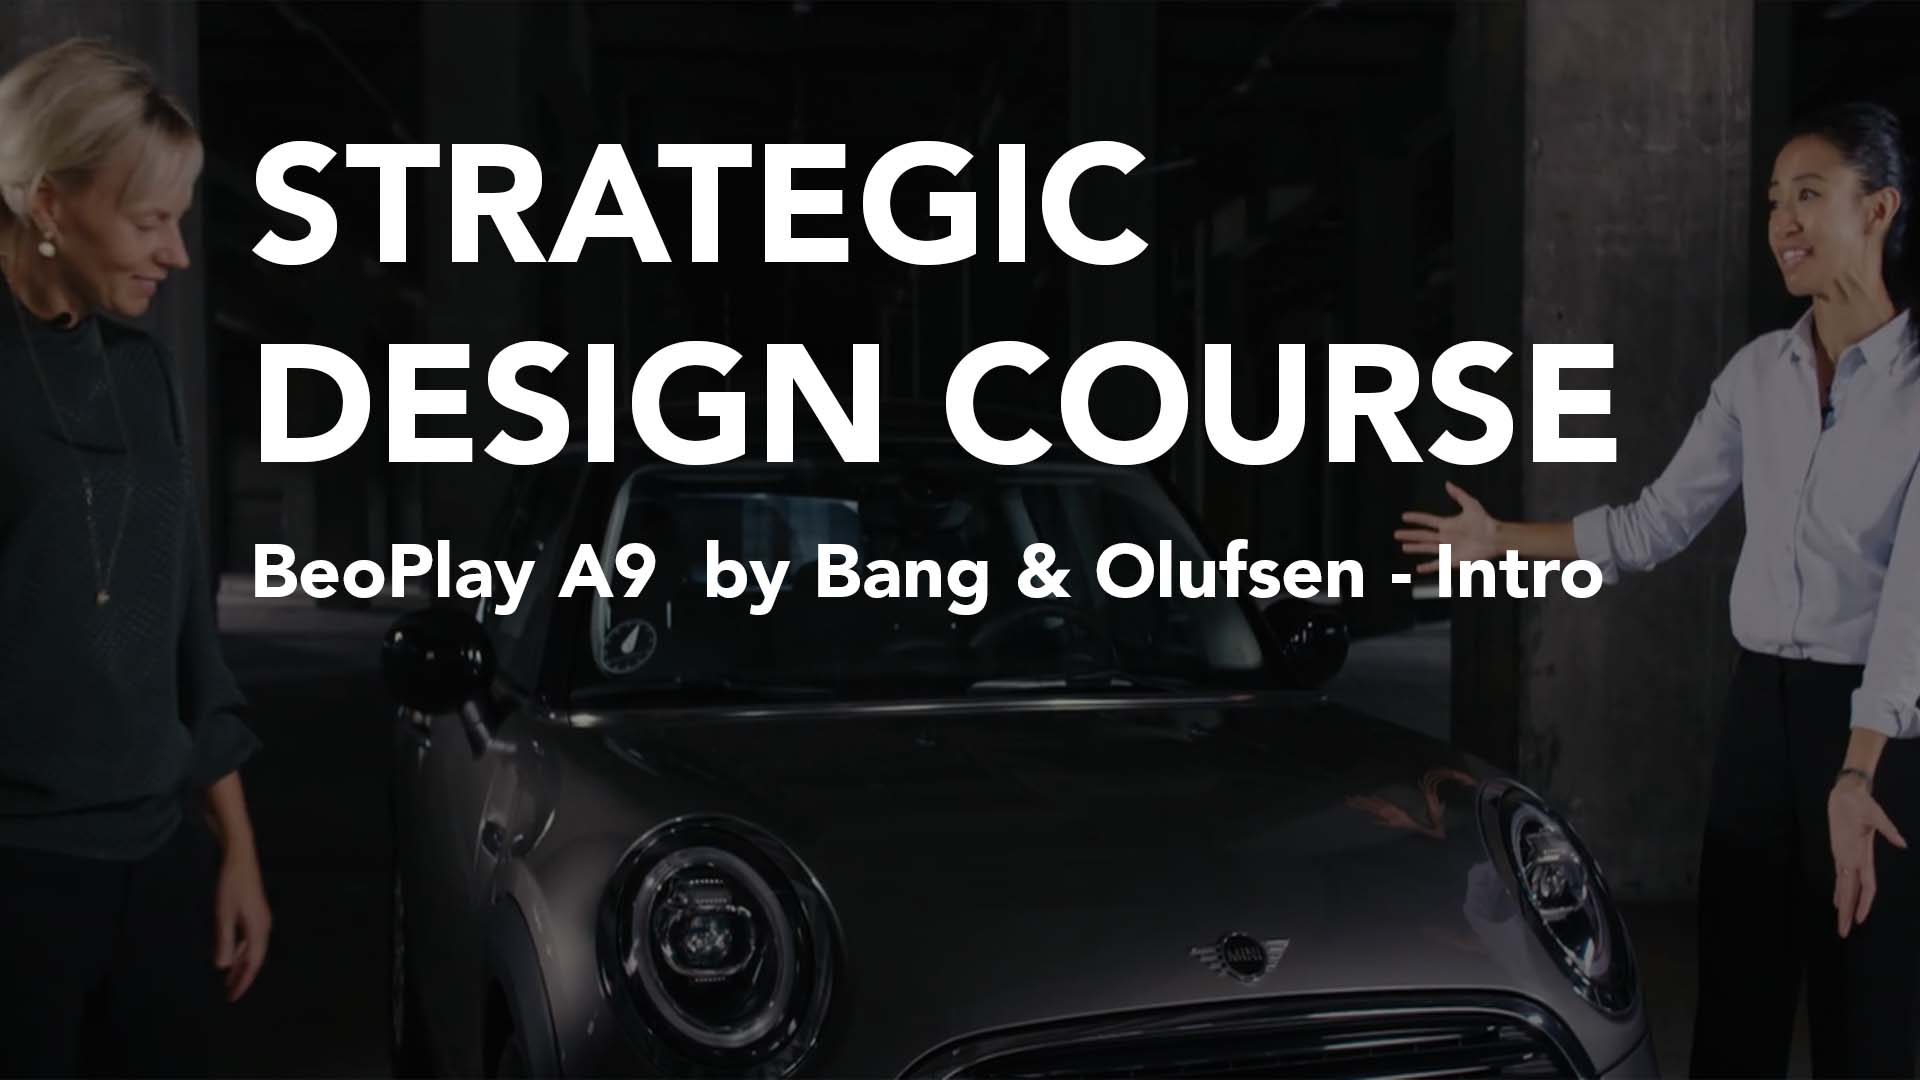 BeoPlay A9 By Bang & Olufsen (Intro) | Strategic Design Course